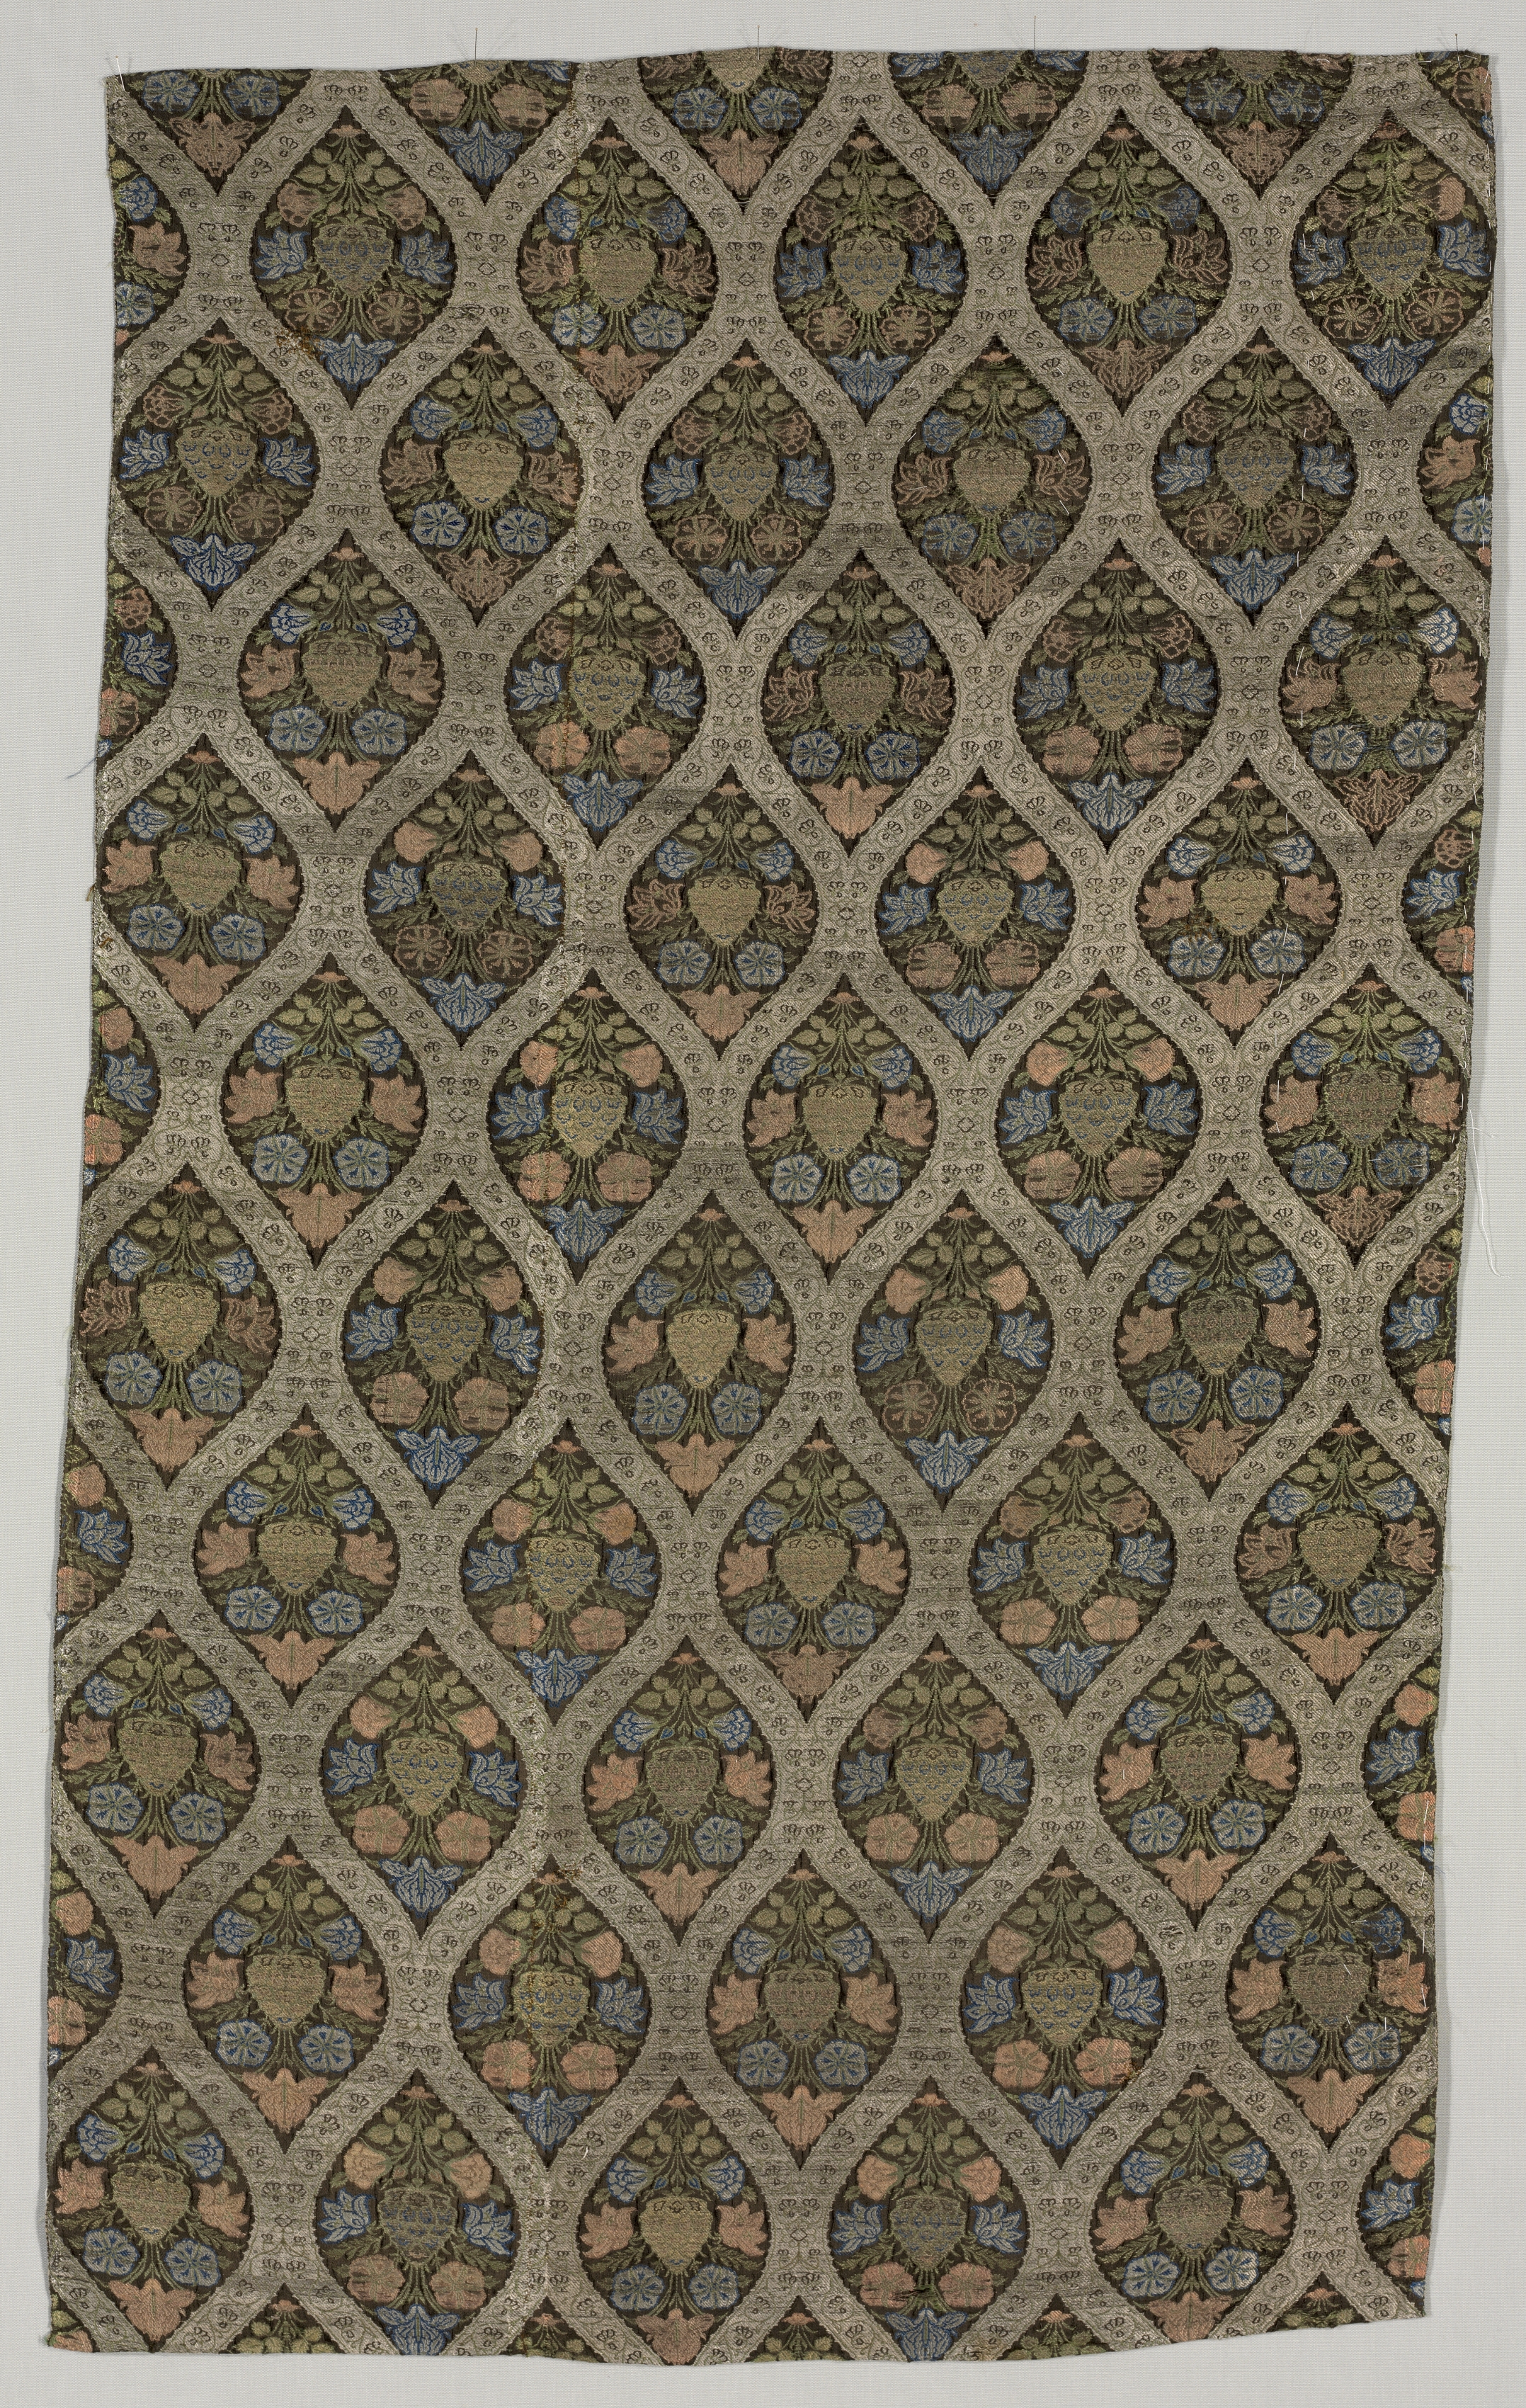 Lampas fragment with blossoms in ogival lattice